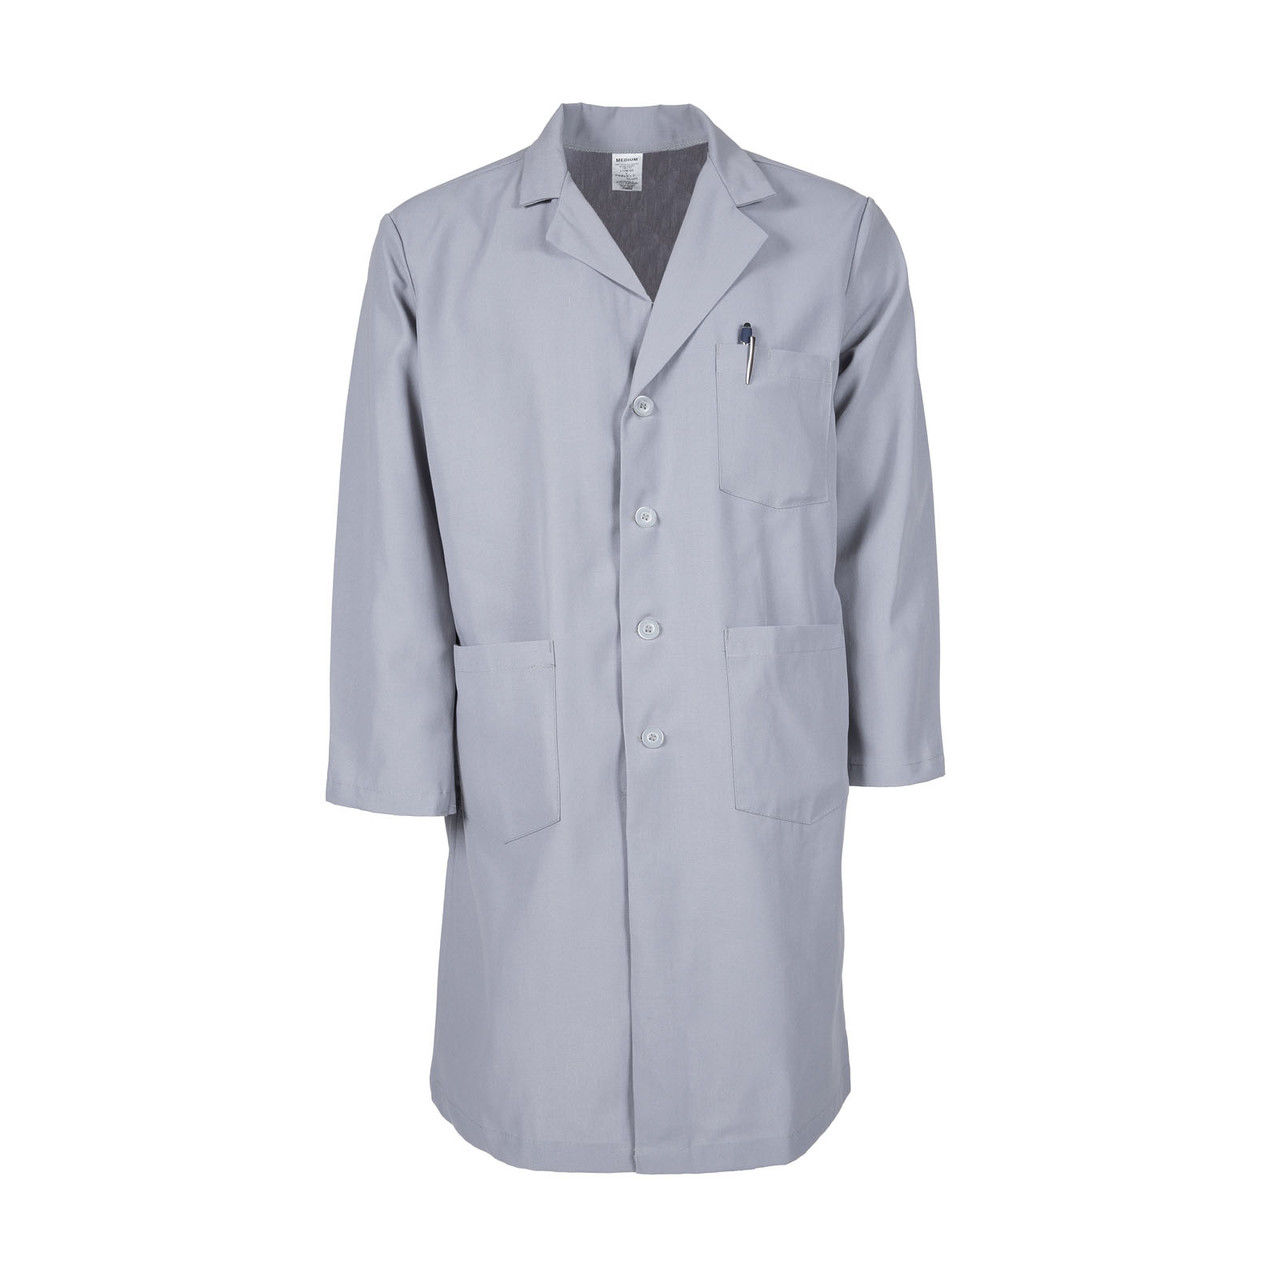 Is the L17M Grey Men's Lab Coat better made of cotton or polyester?